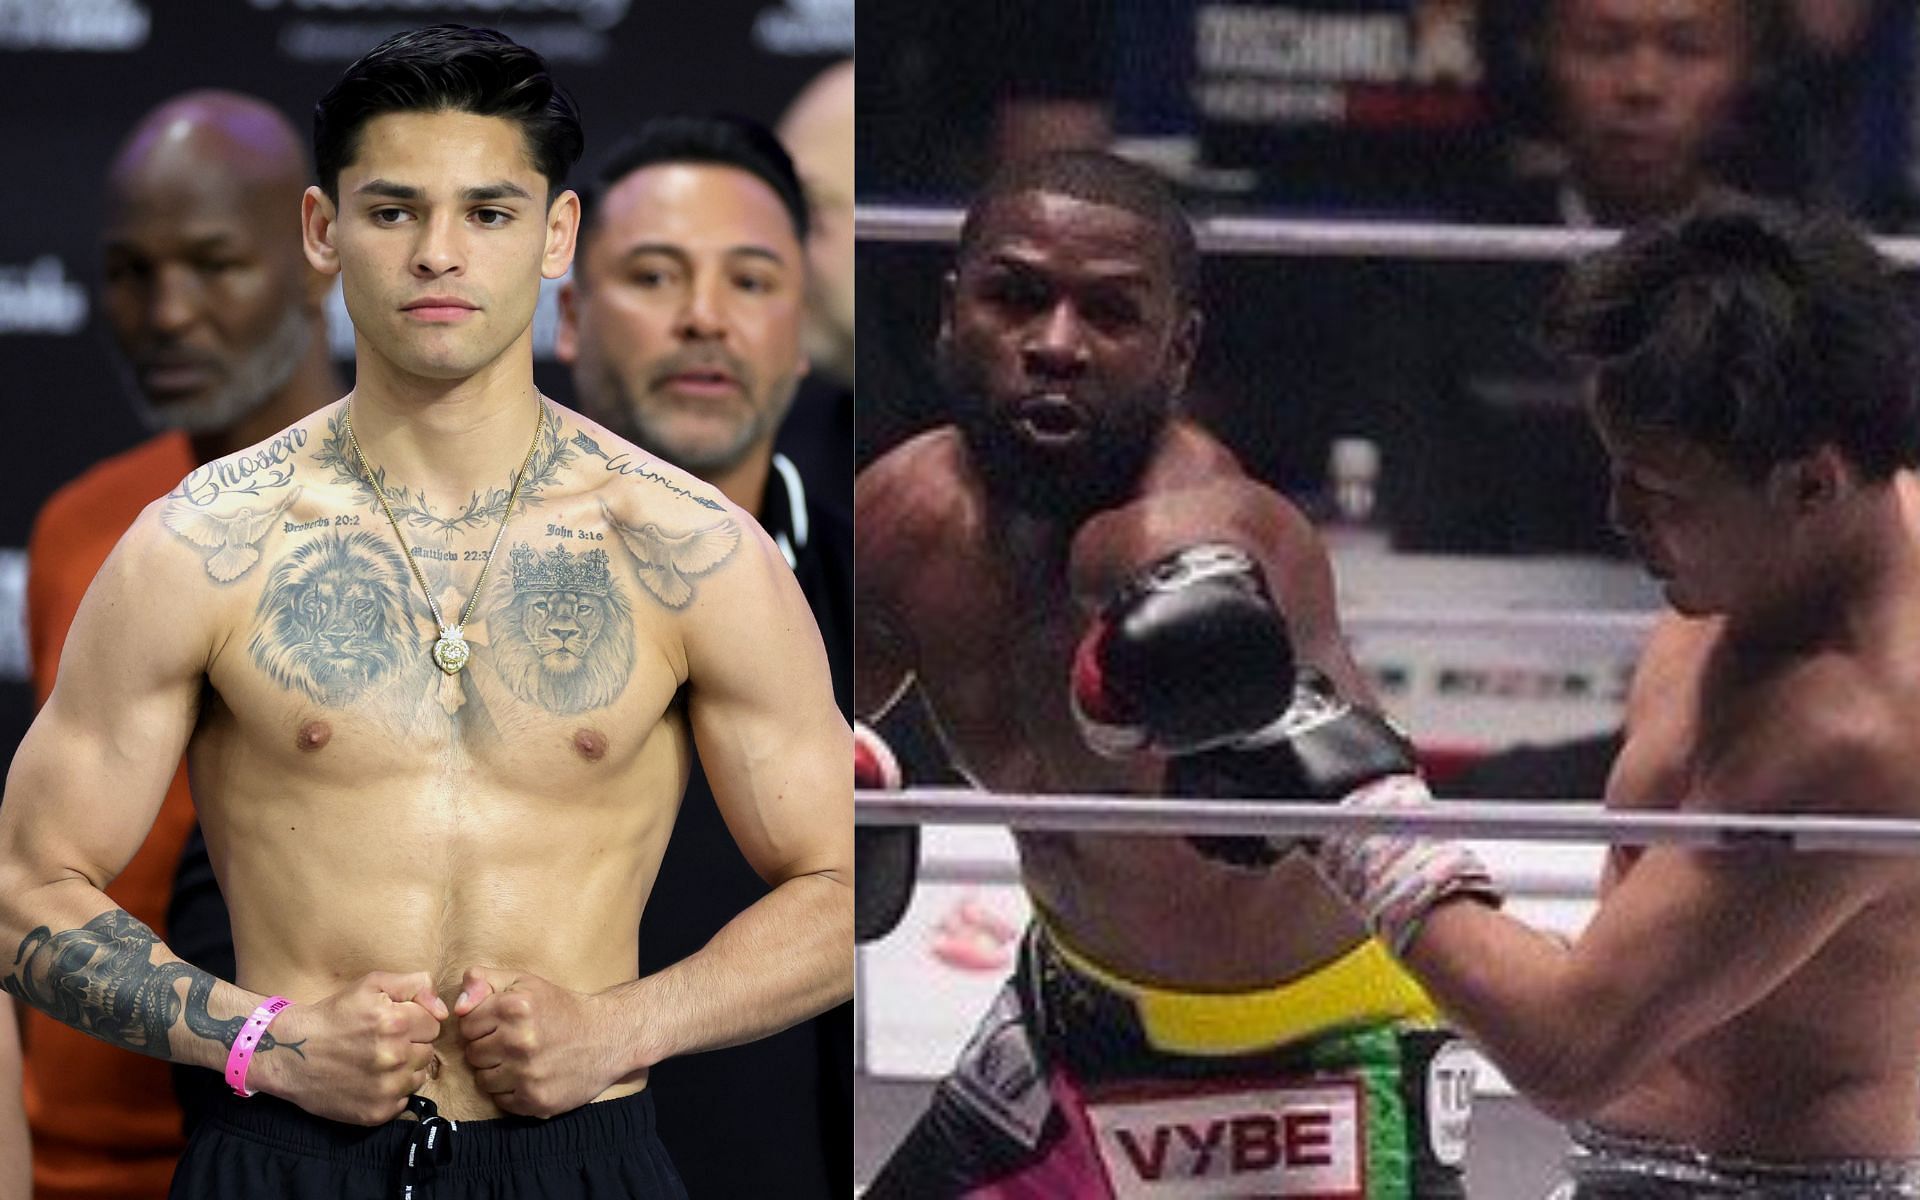 Ryan Garcia (left) and Floyd Mayweather in the ring with Mikuru Asakura (right) (Image credits Getty Images)